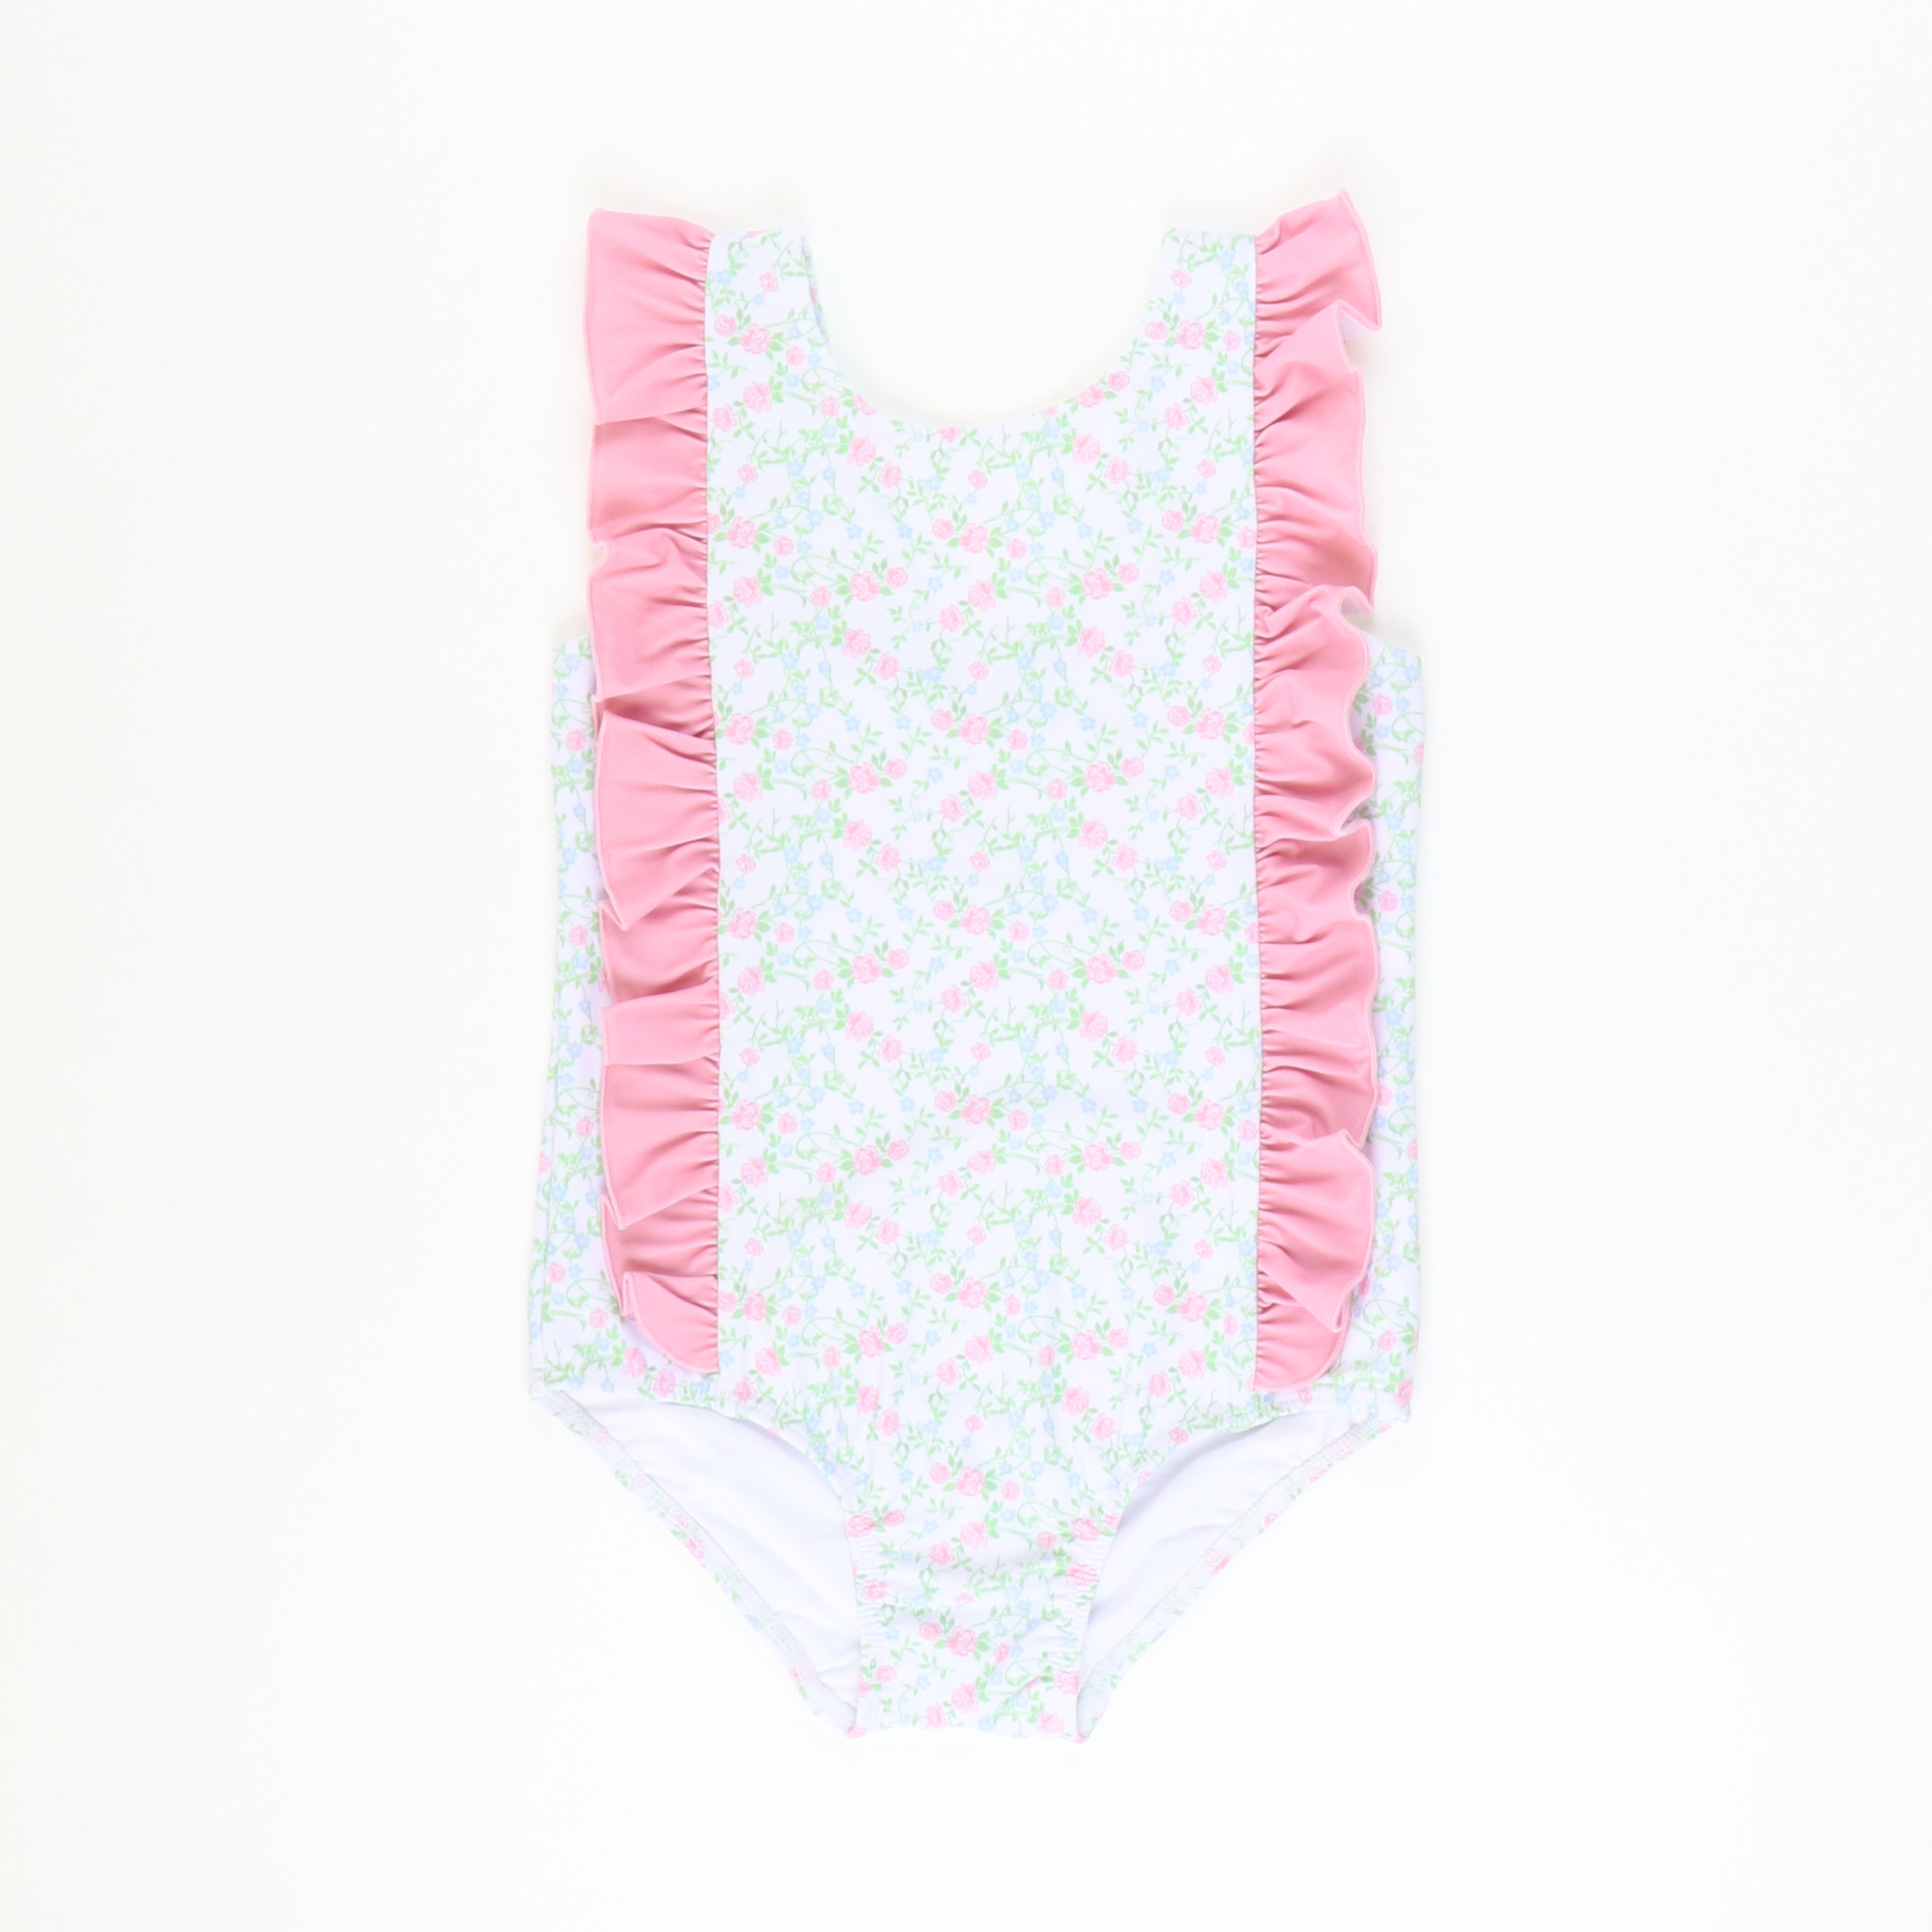 One-Piece Swimsuit - Pink & Blue Floral